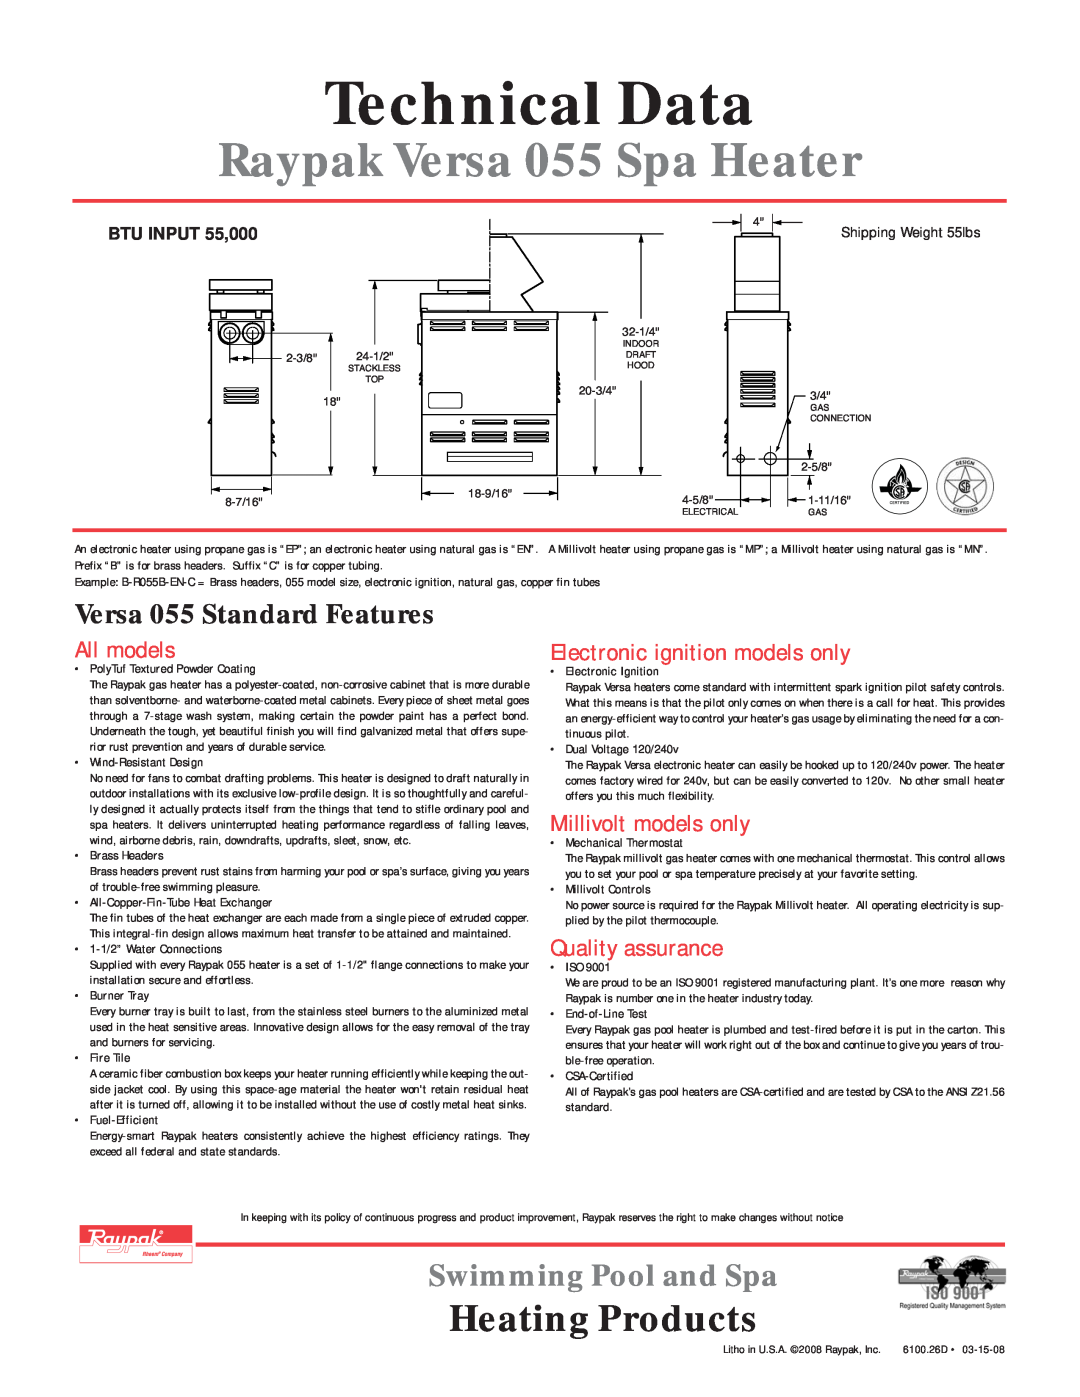 Raypak manual Technical Data, Raypak Versa 055 Spa Heater, Heating Products, Swimming Pool and Spa, All models 